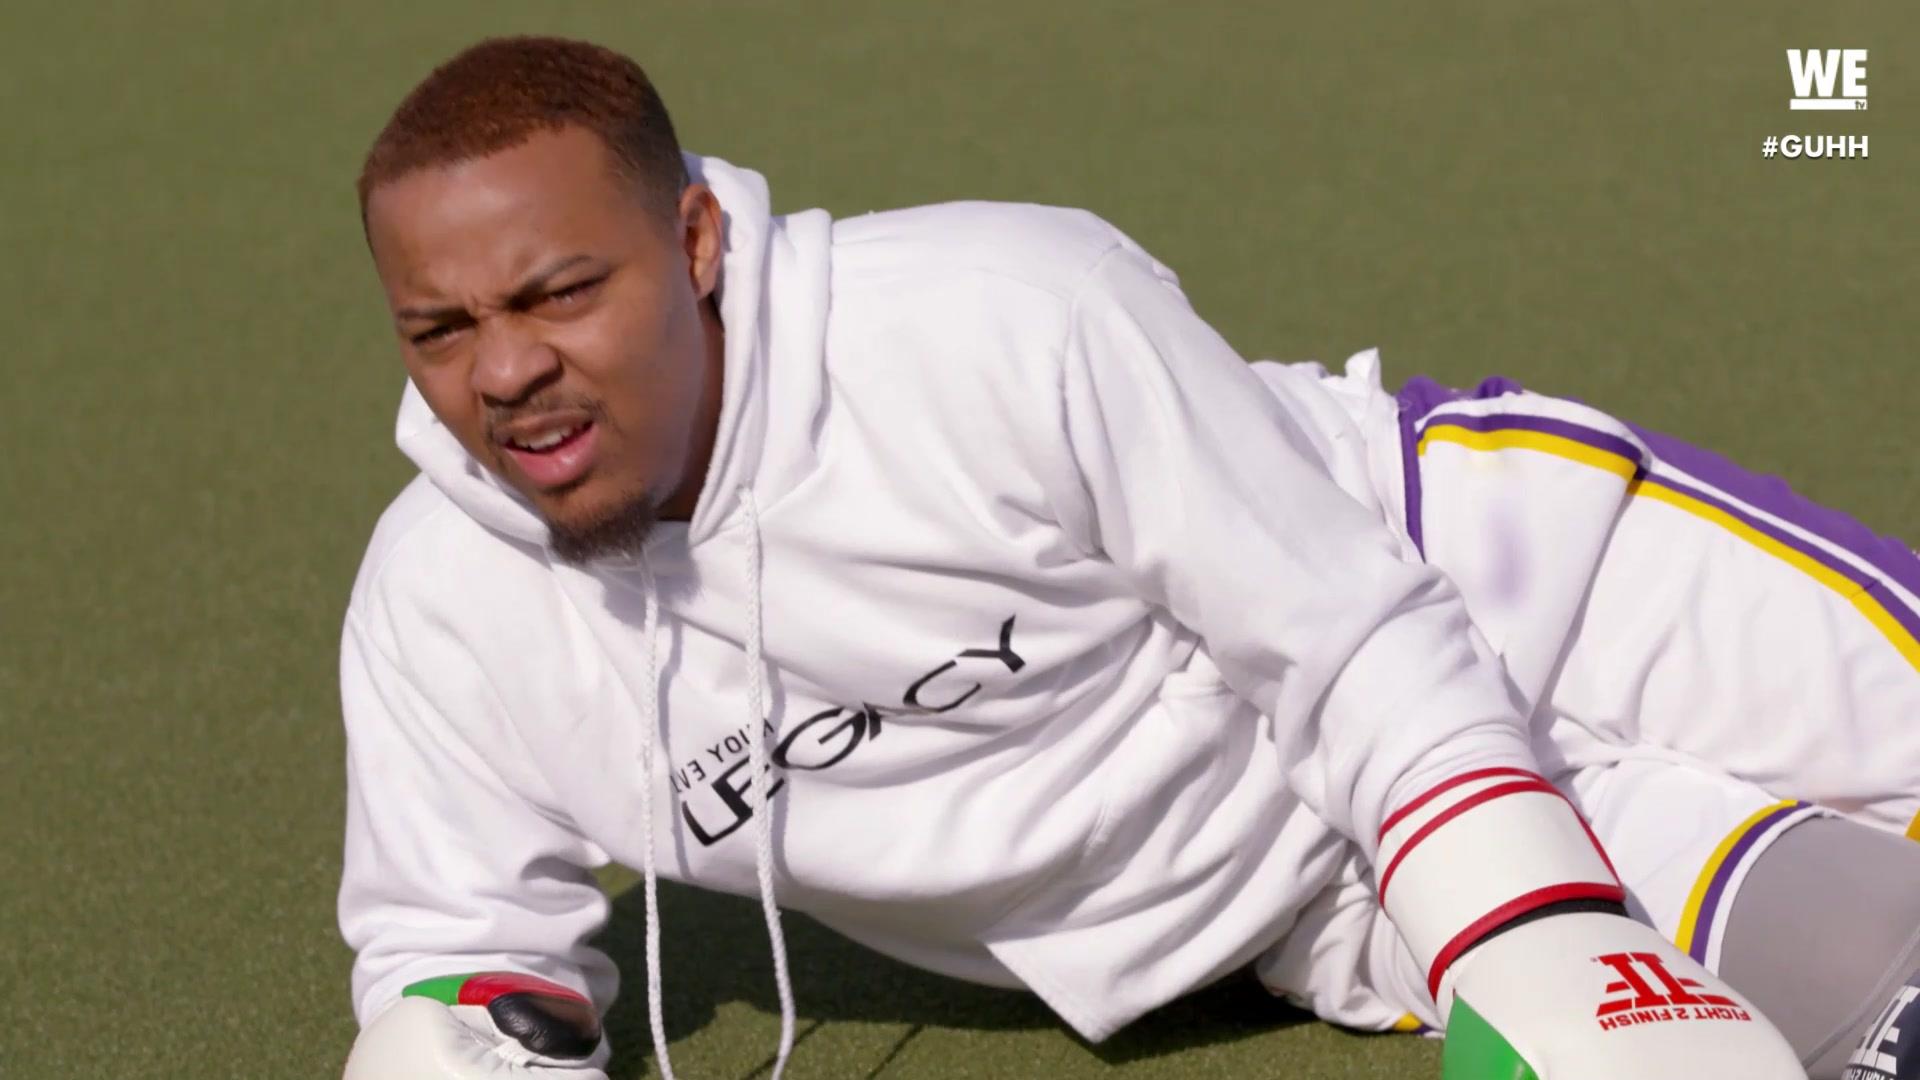 Unexpected: Bow Wow Bows Out!